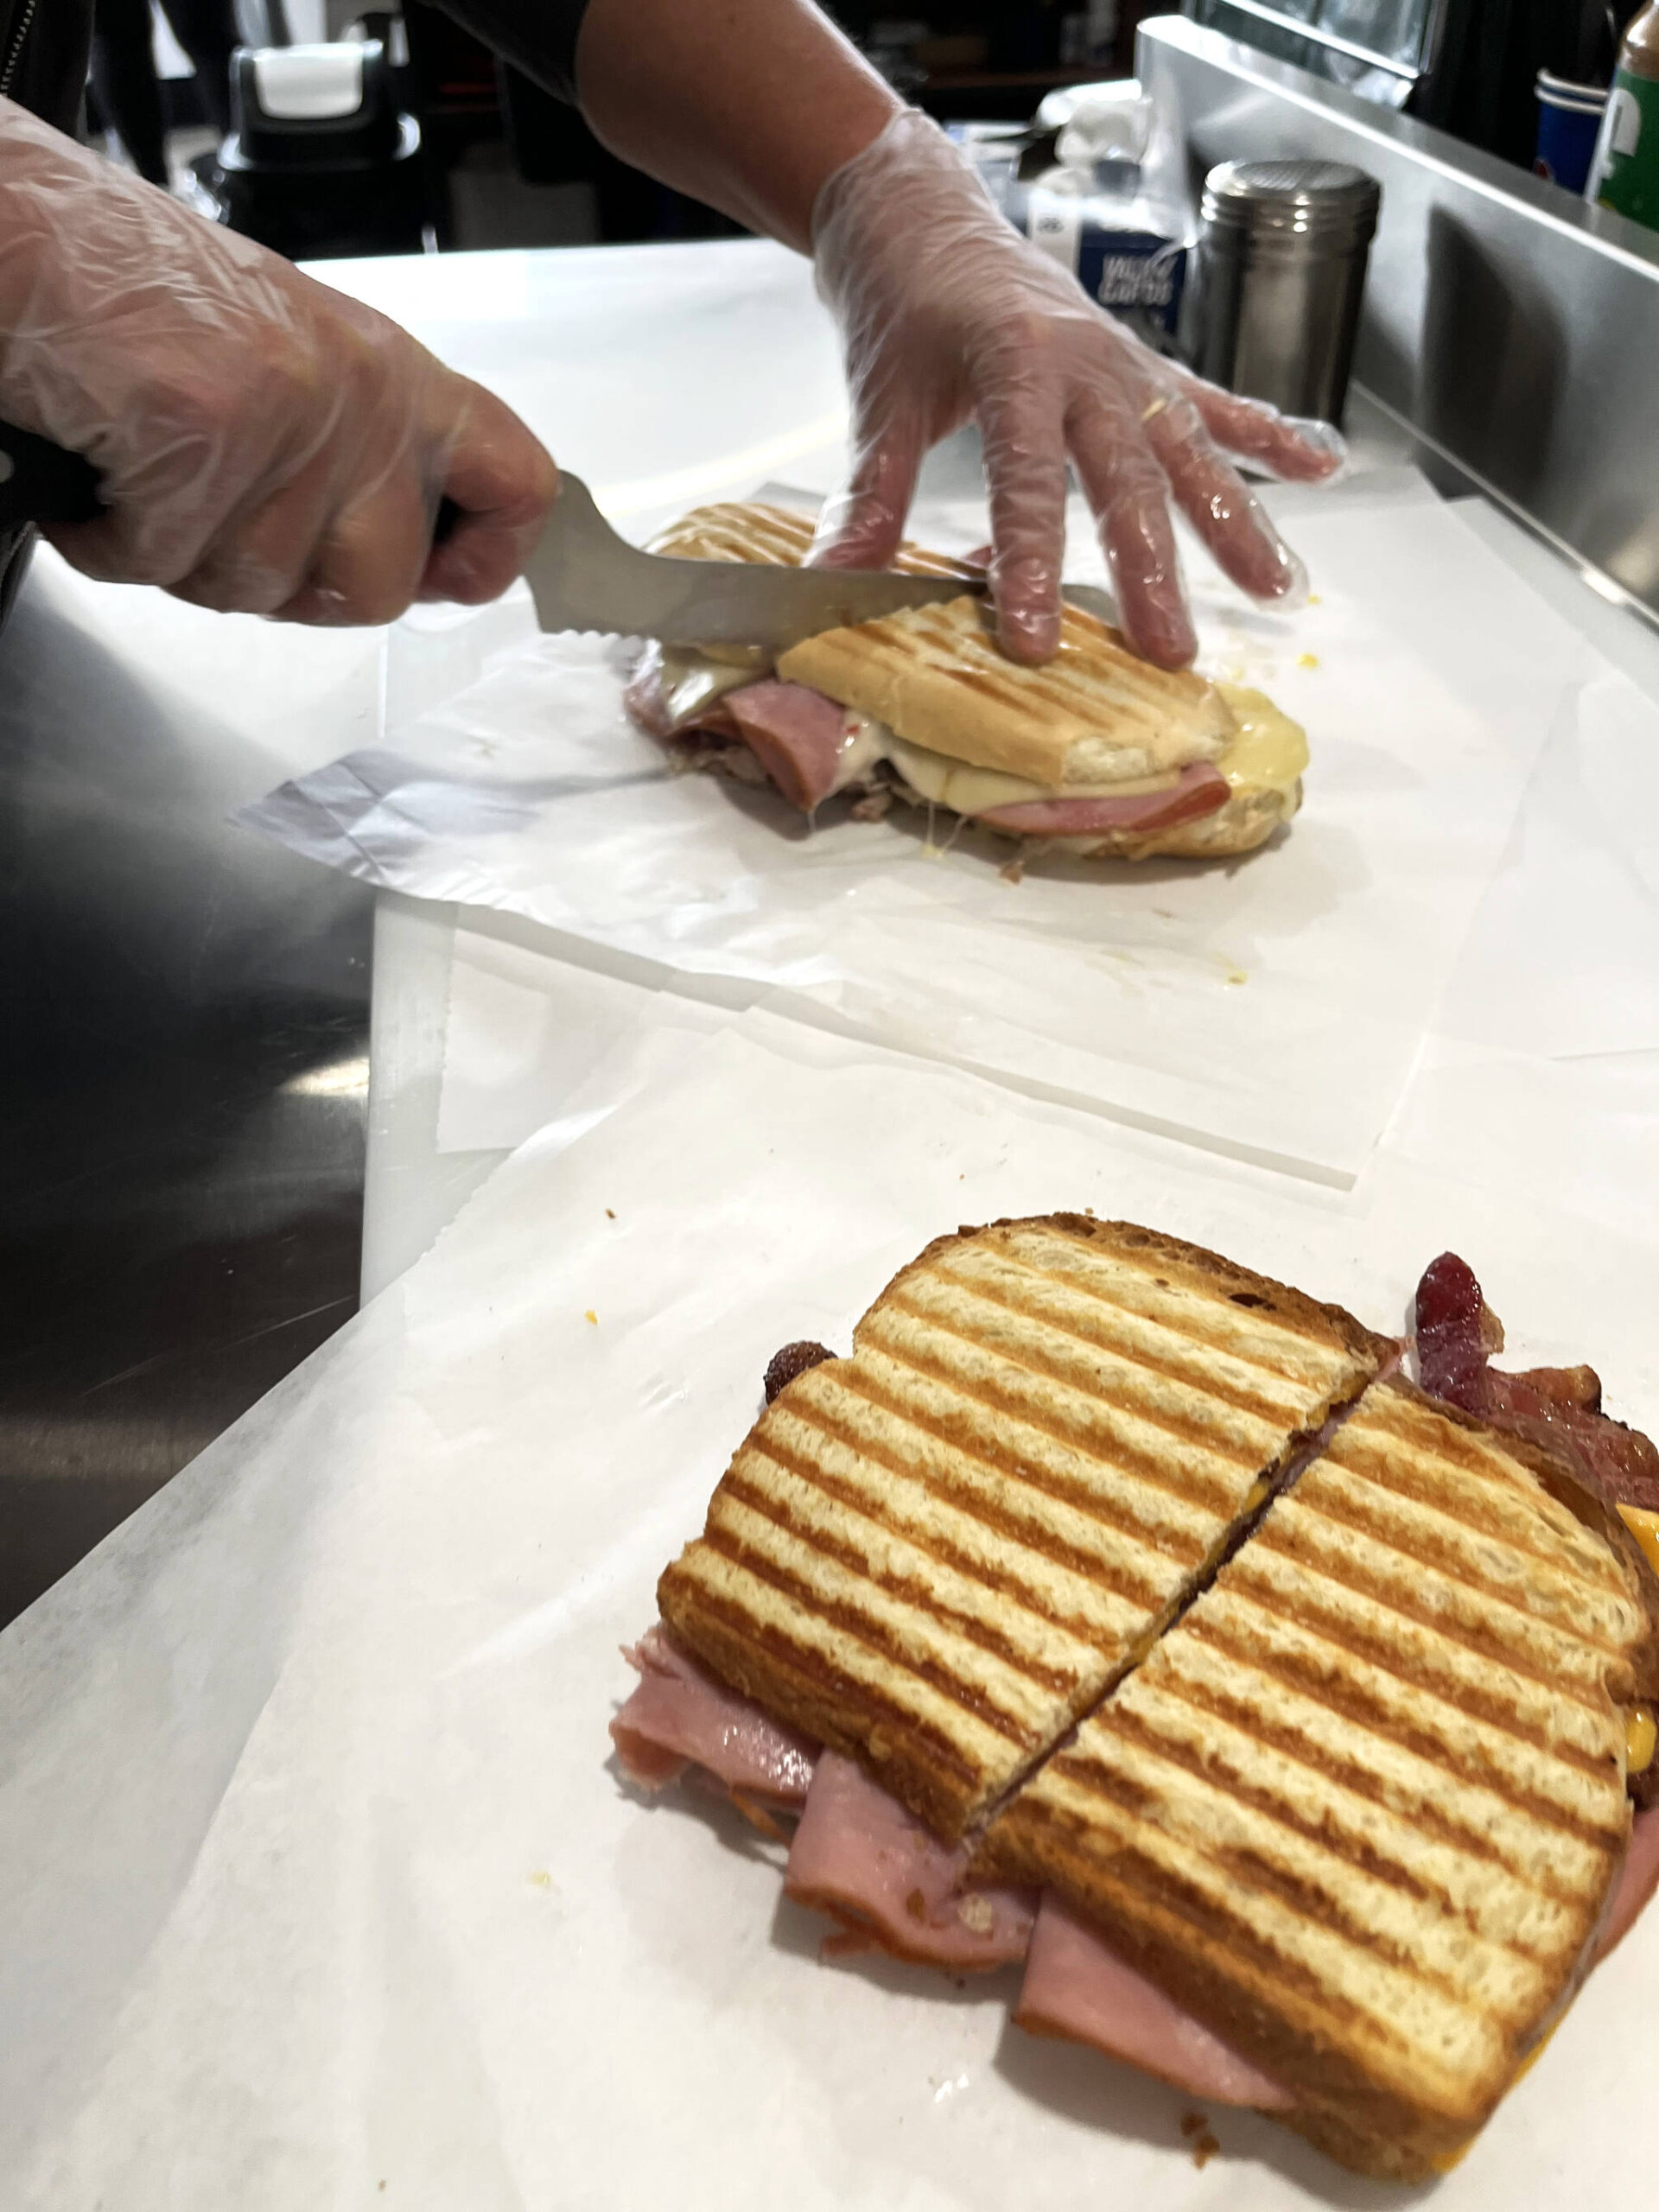 Shelly Dixon, after pulling off a freshly-grilled breakfast sandwich from the press, cuts into The Cuban sandwich, which comes with six ounces of pulled pork.